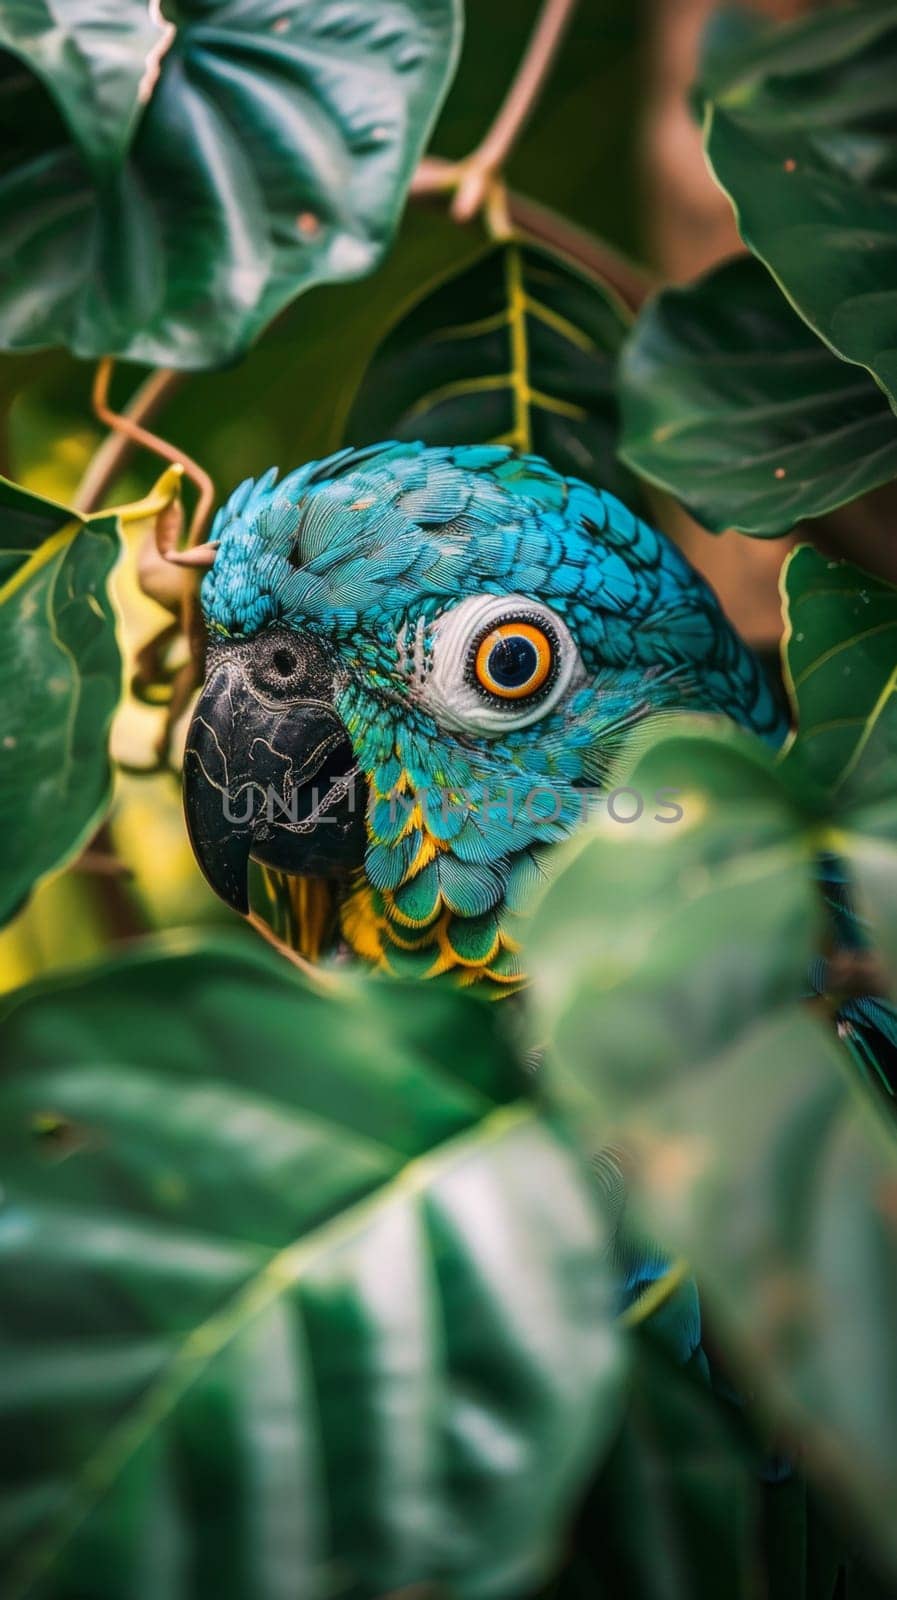 A blue parrot sitting in a tree surrounded by leaves